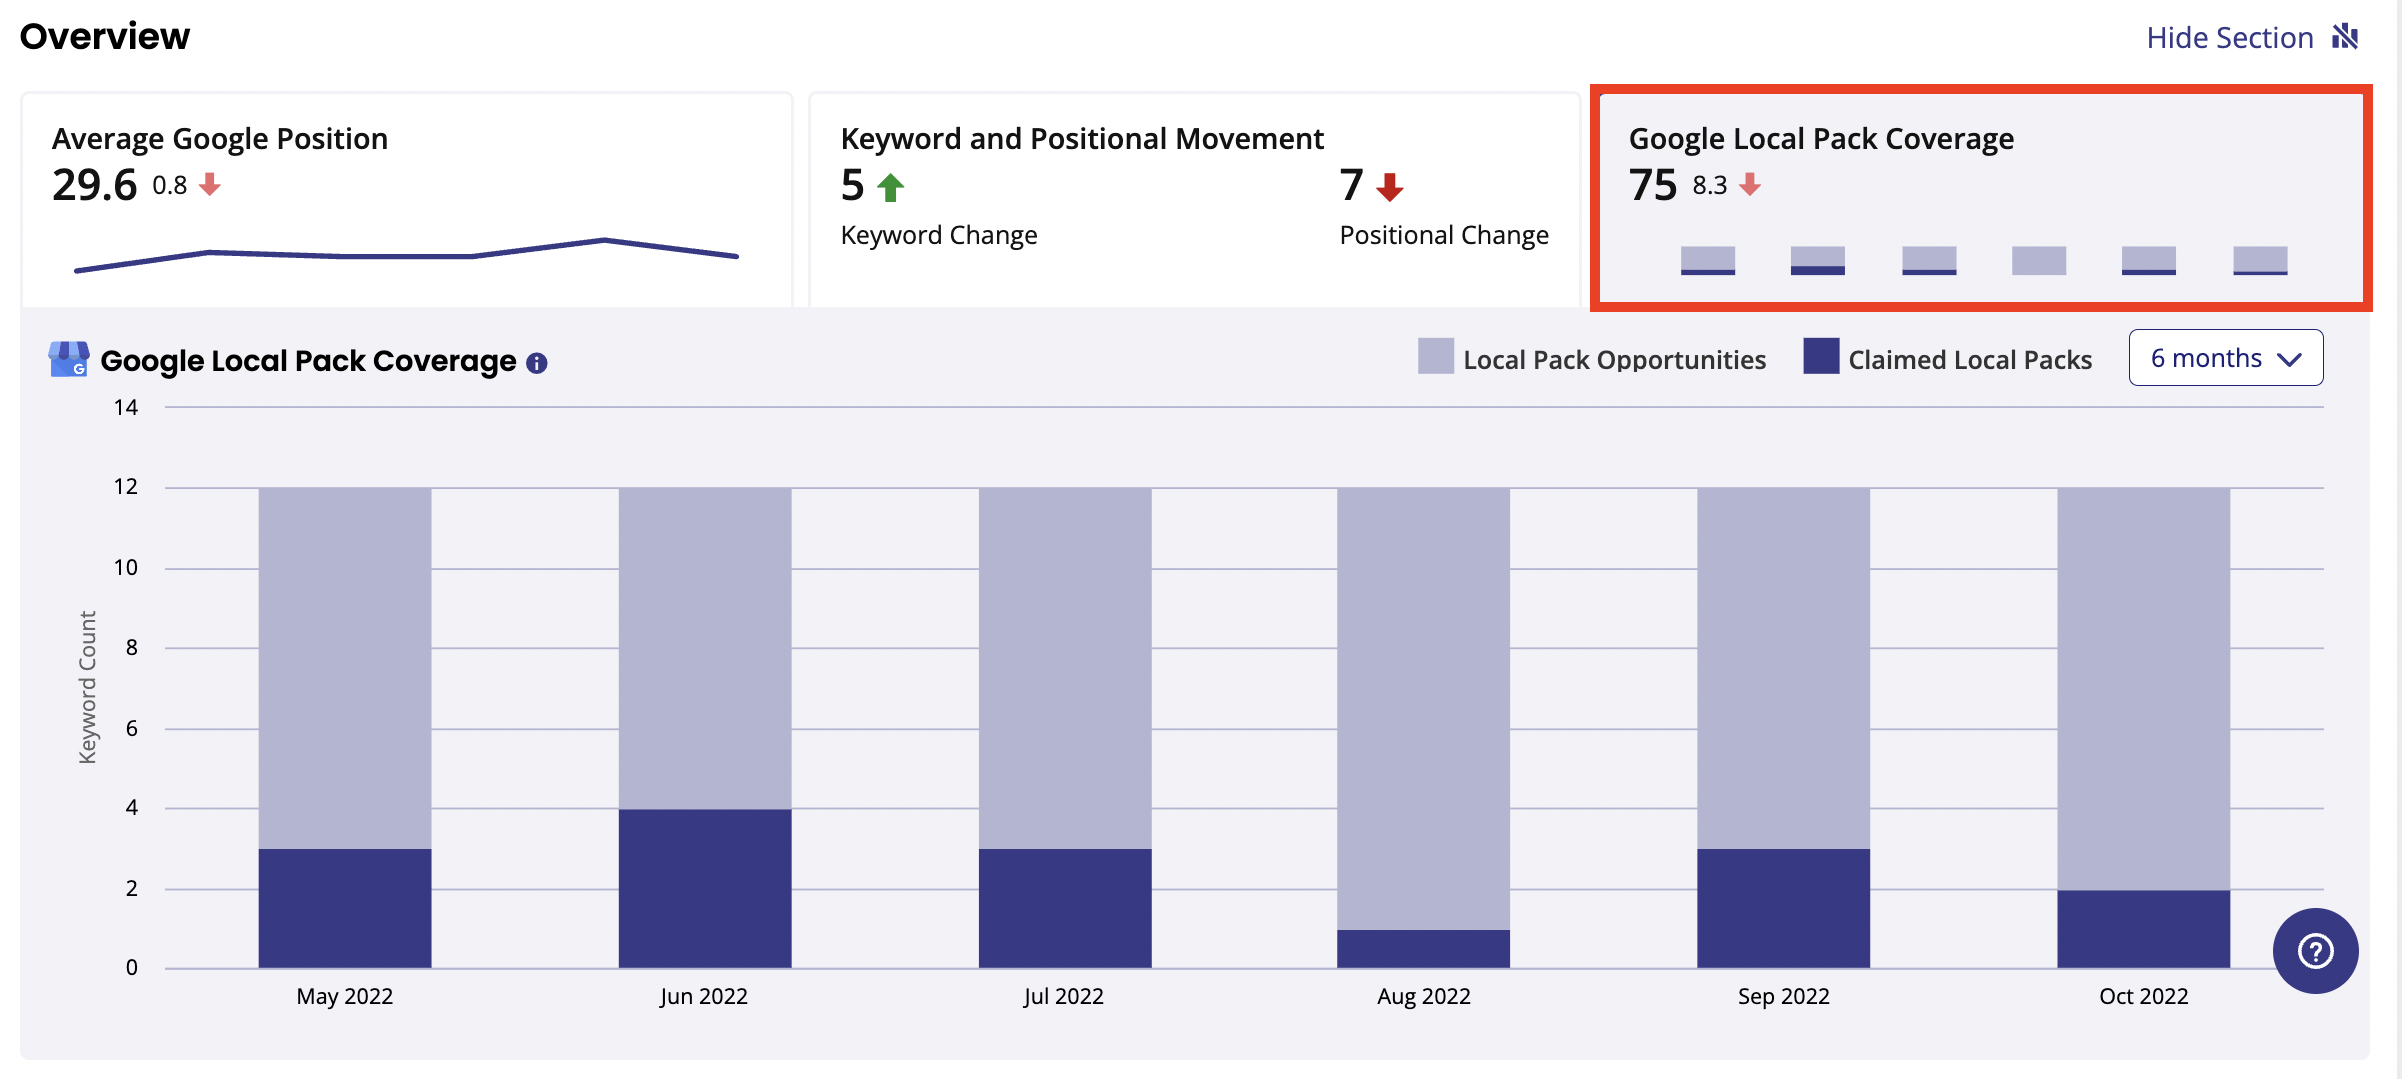 'Google Local Pack Coverage' chart